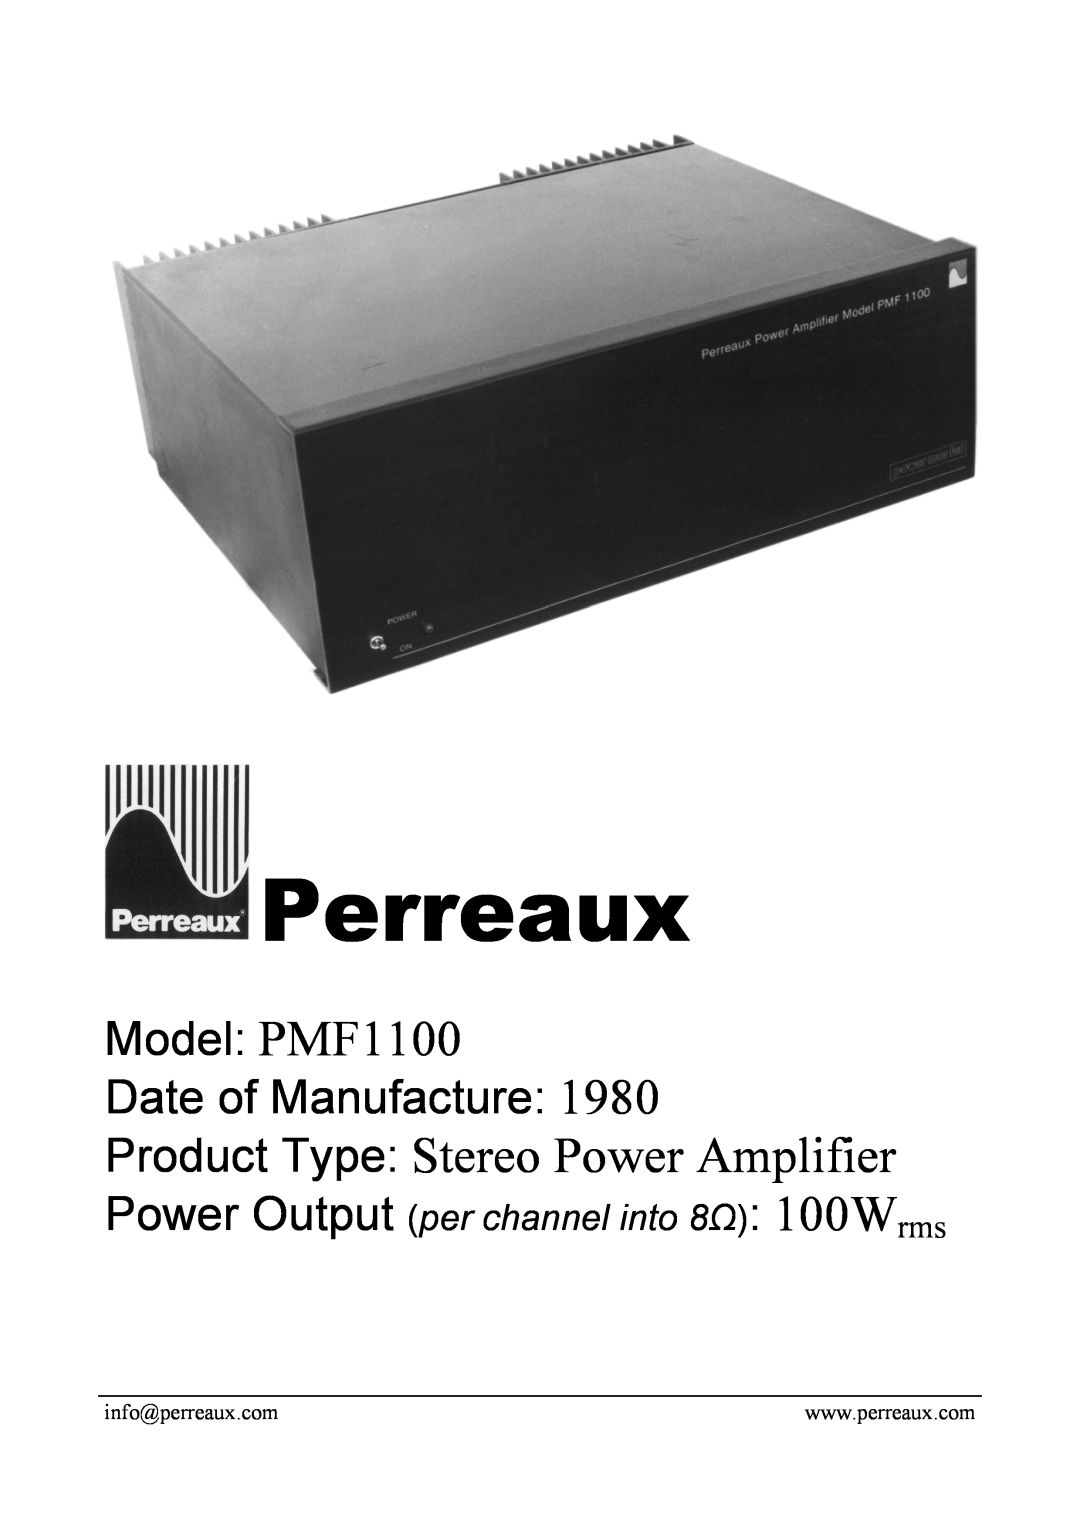 Perreaux manual Perreaux, Product Type Stereo Power Amplifier, Model PMF1100 Date of Manufacture 